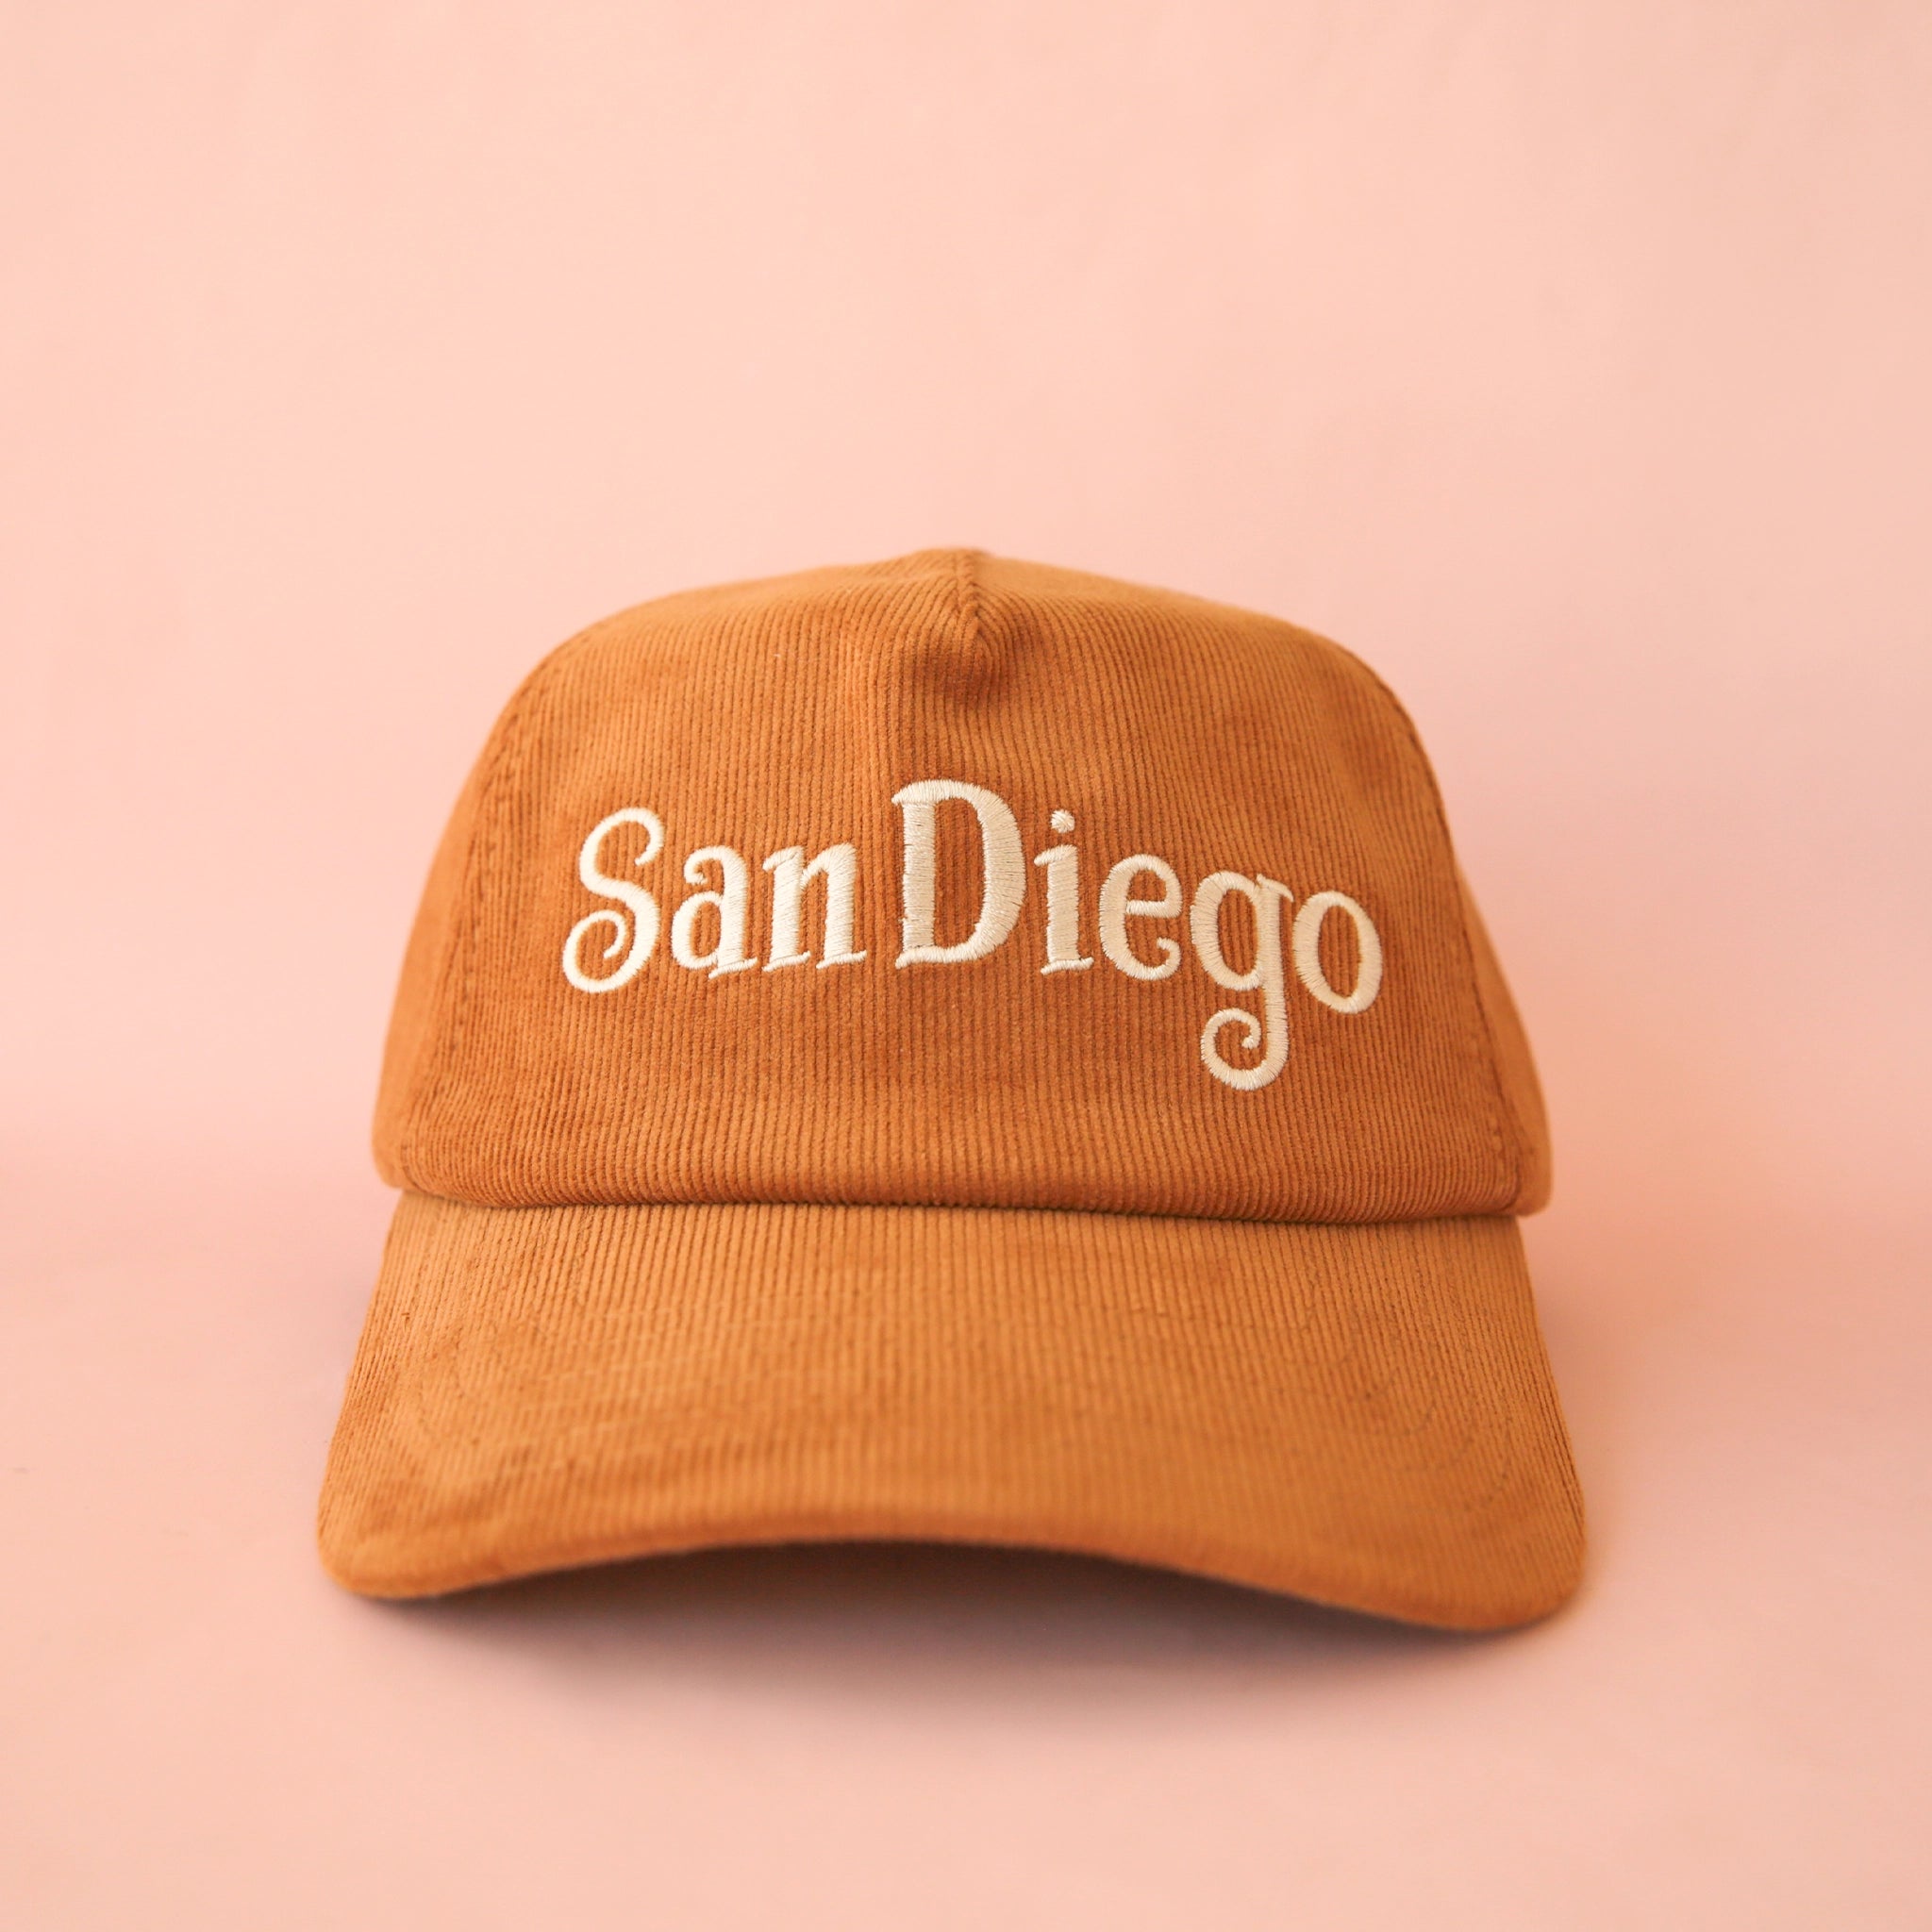 On a pink background is a toffee colored baseball cap that has a corduroy texture and says, "San Diego" in white lettering.